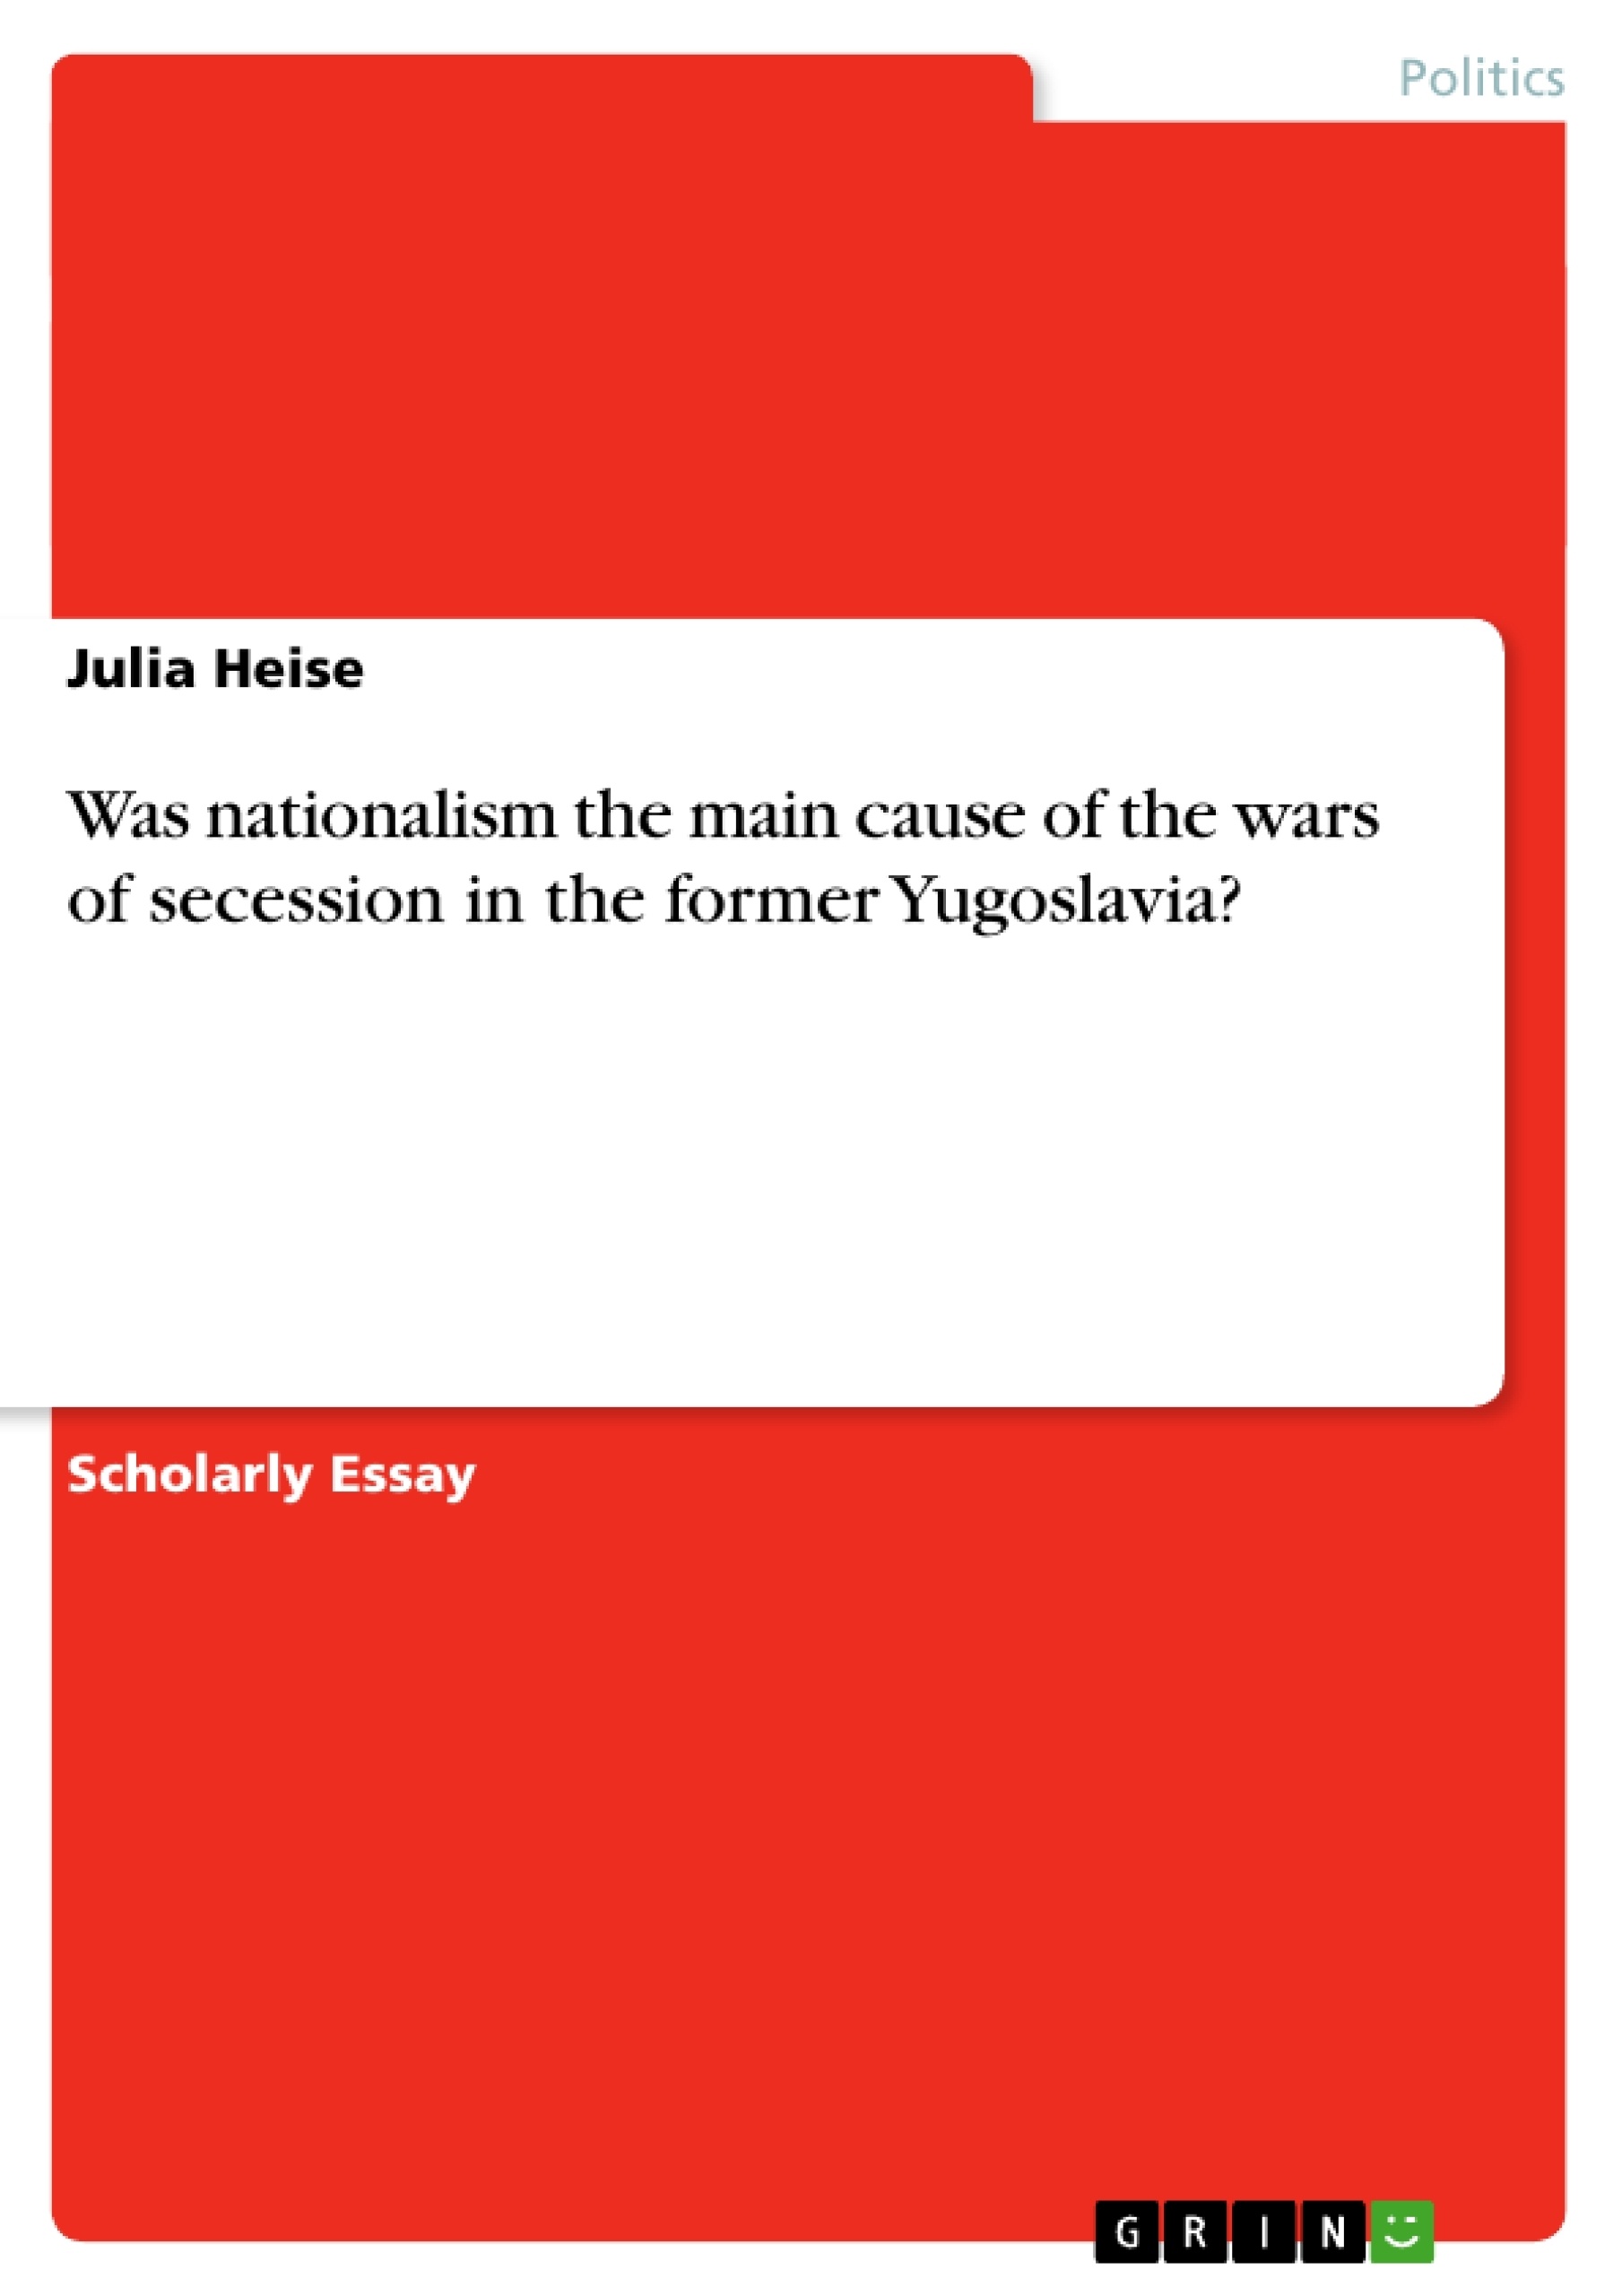 Title: Was nationalism the main cause of the wars of secession in the former Yugoslavia?